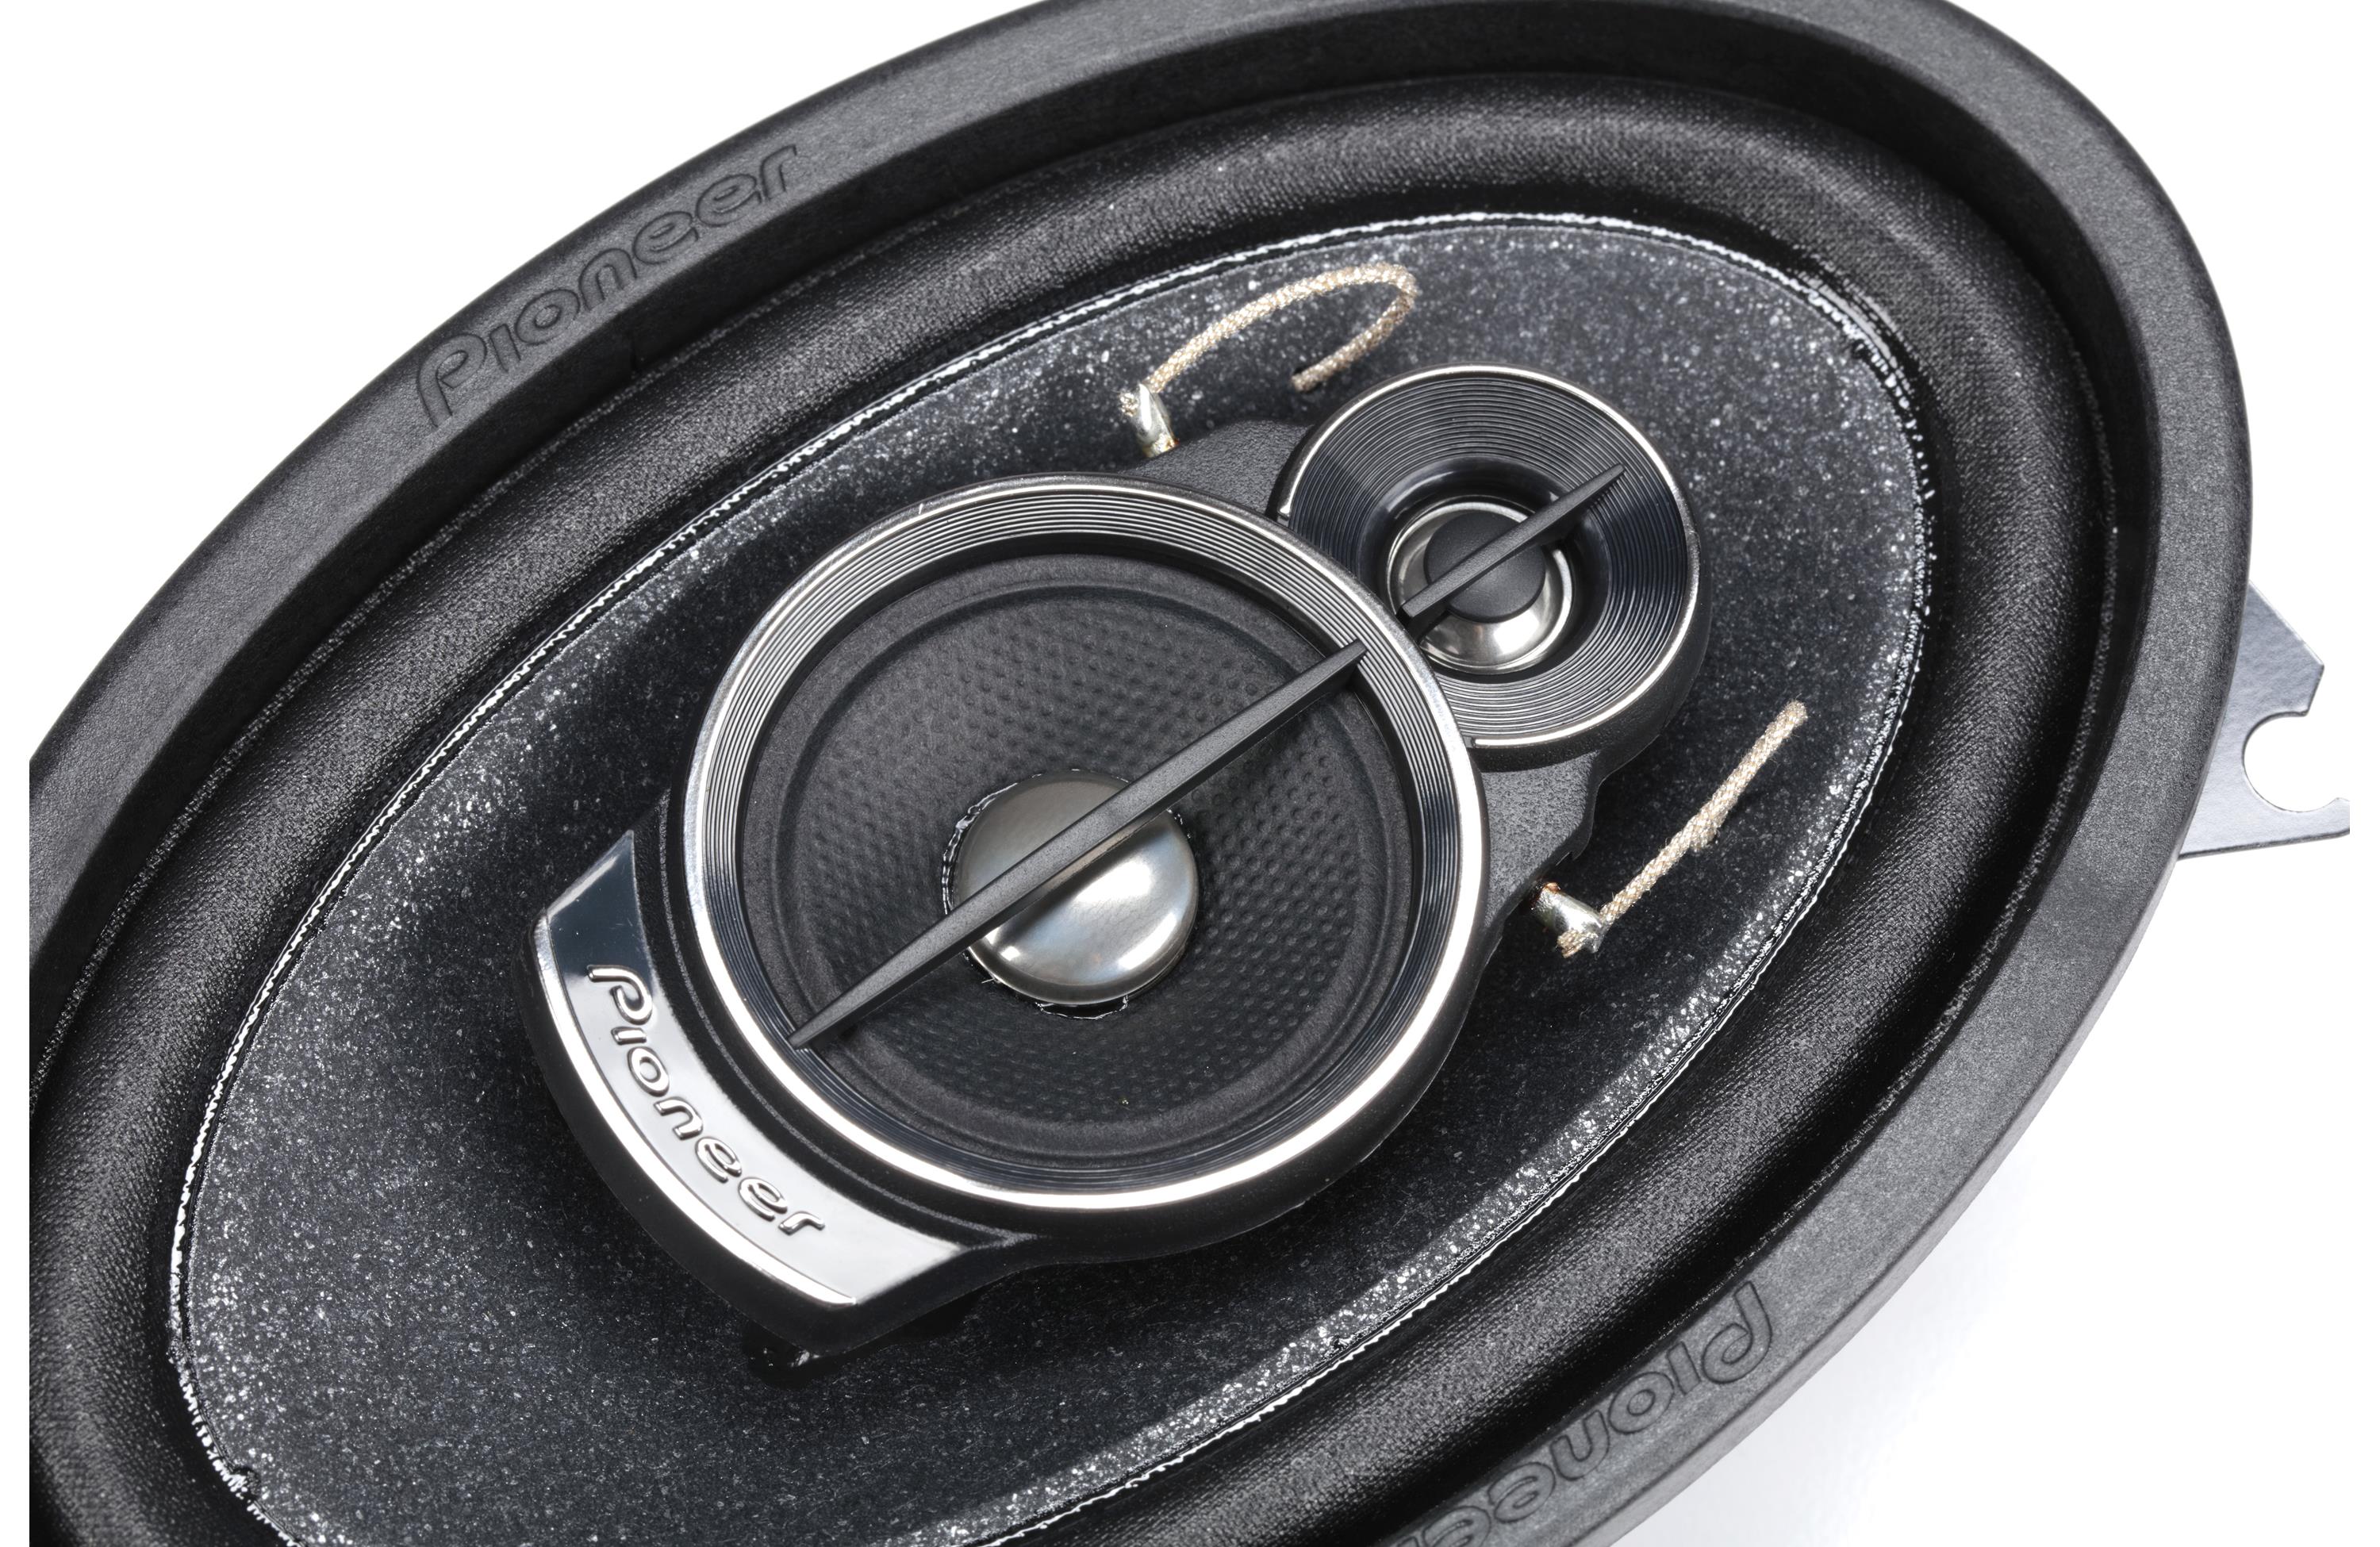 Pioneer 200W 4x6 Inch 3 Way 4 Ohms Coaxial Car Audio Speakers Pair | TS-A4676R - image 5 of 5